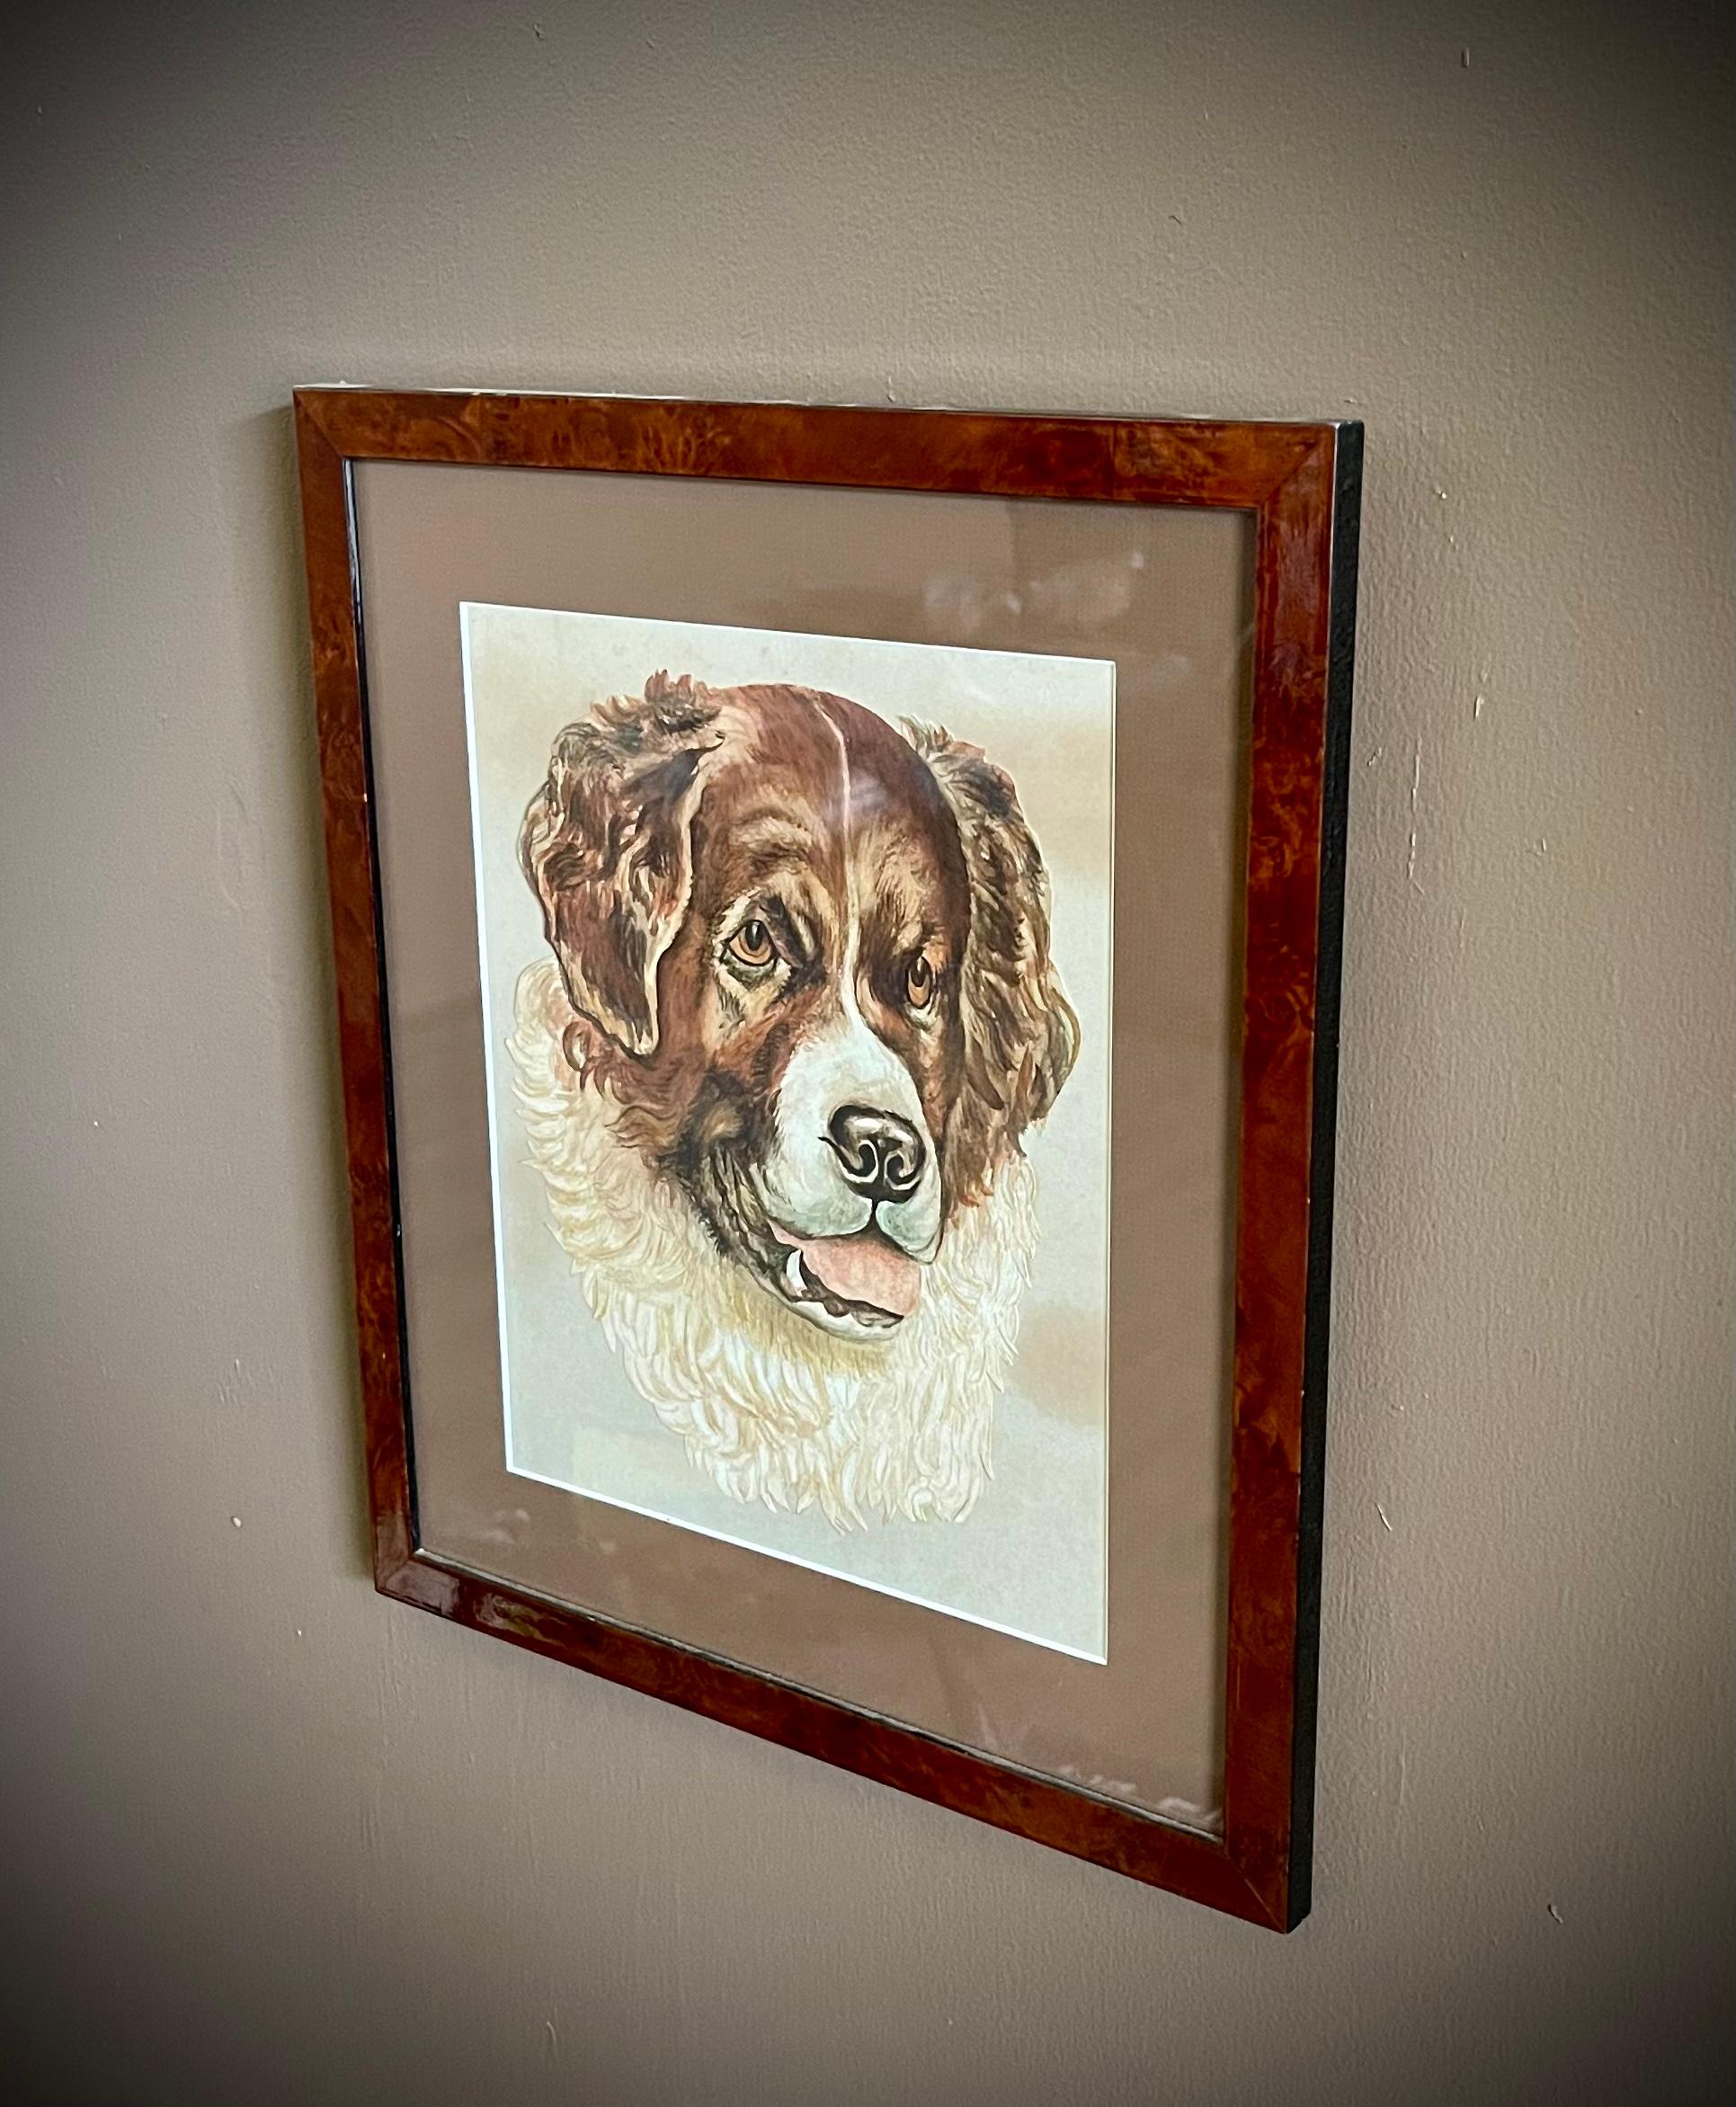 Capture the majestic beauty of a Bernese Mountain Dog in this exquisite antique watercolor portrait. With remarkable precision and detail, the artist has immortalized the noble features of this beloved breed, from the distinctive tri-color coat to